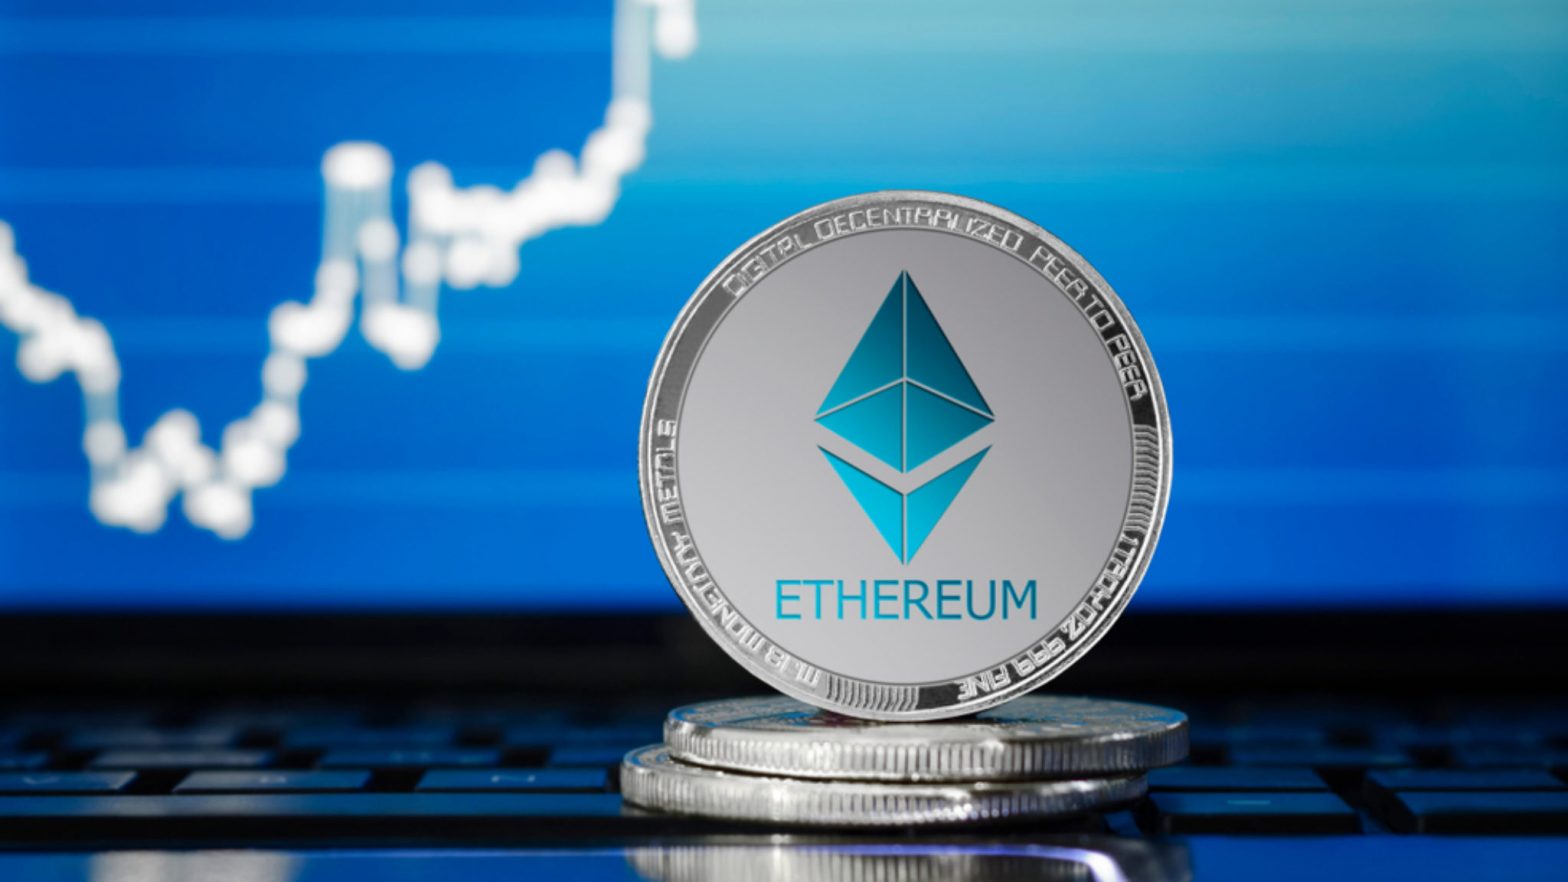 [Will Ethereum go to $100,000] Will Ethereum go to $1,000